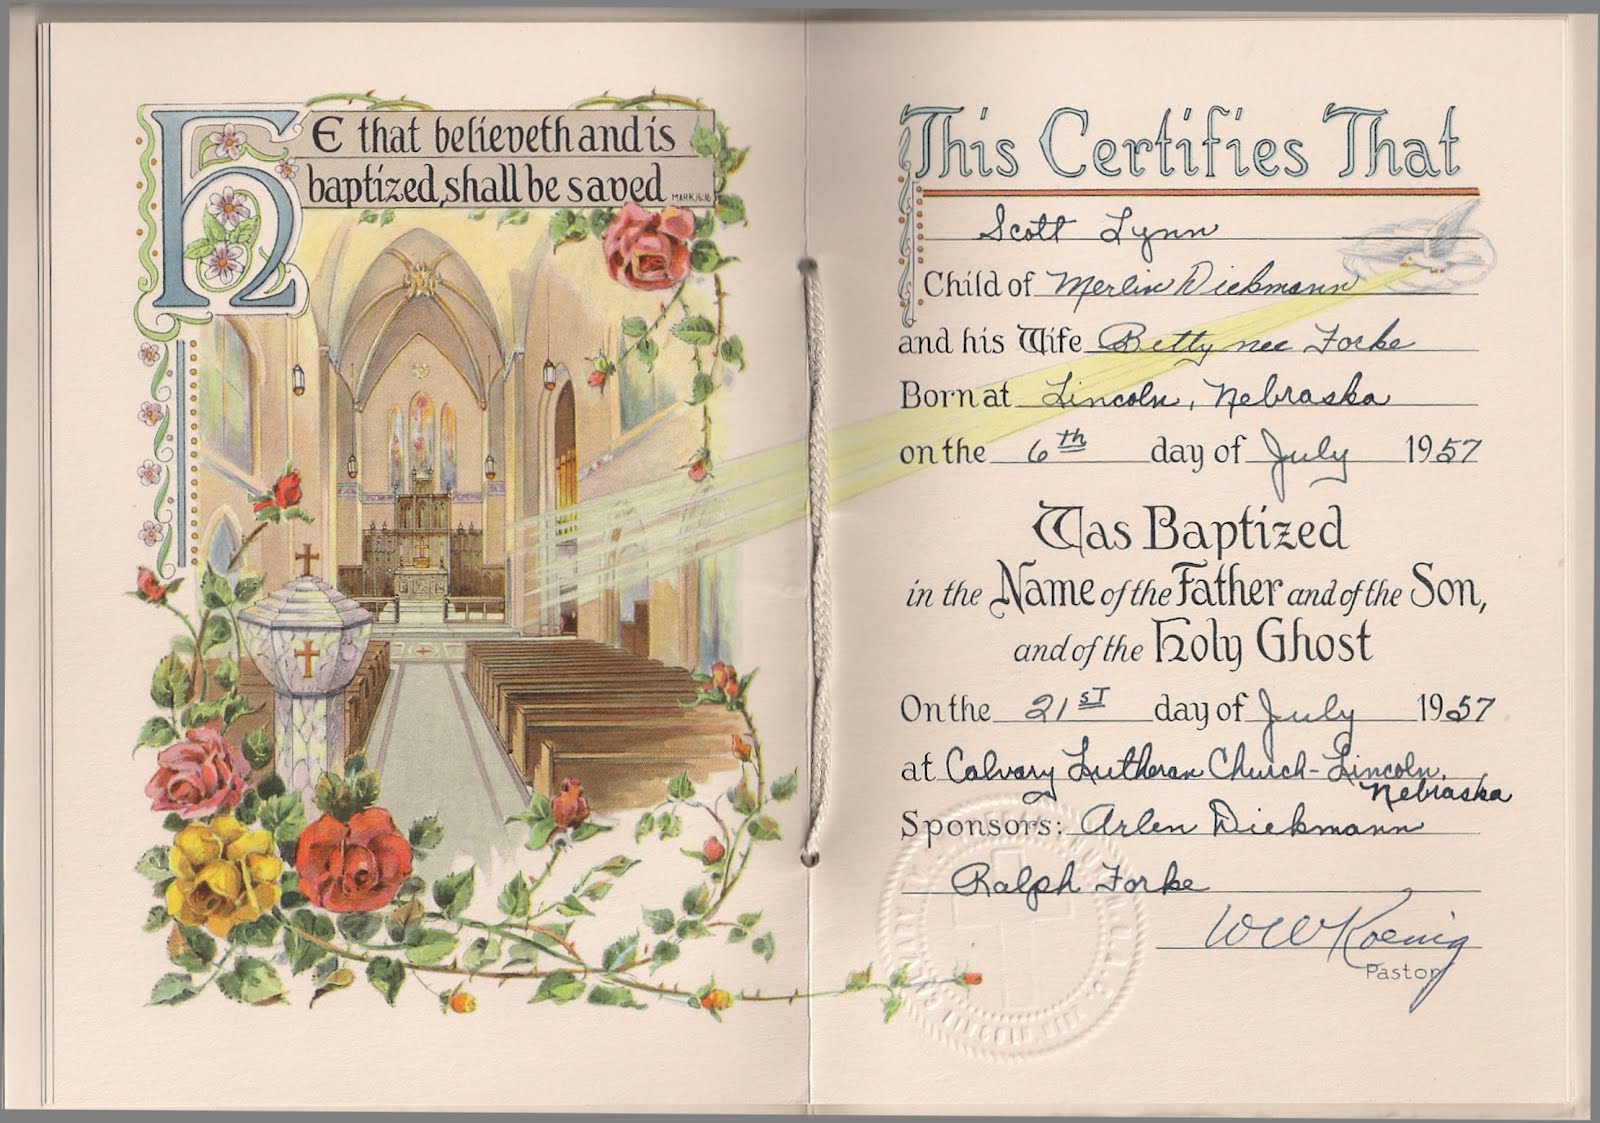 stand-firm-looking-for-awesome-baptismal-certicates-or-confirmation-certificates